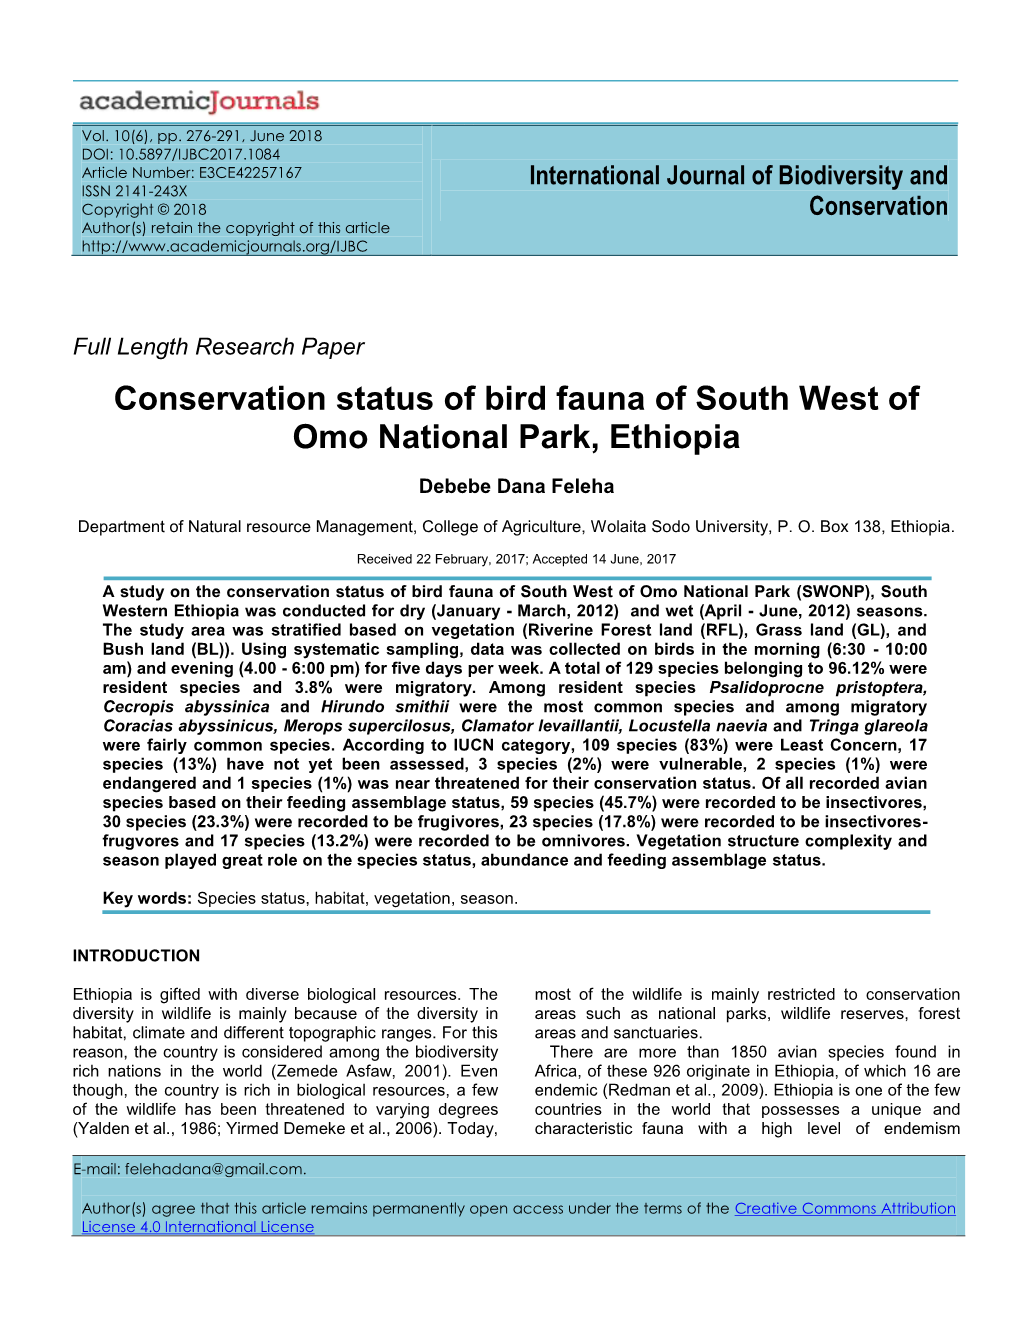 Conservation Status of Bird Fauna of South West of Omo National Park, Ethiopia